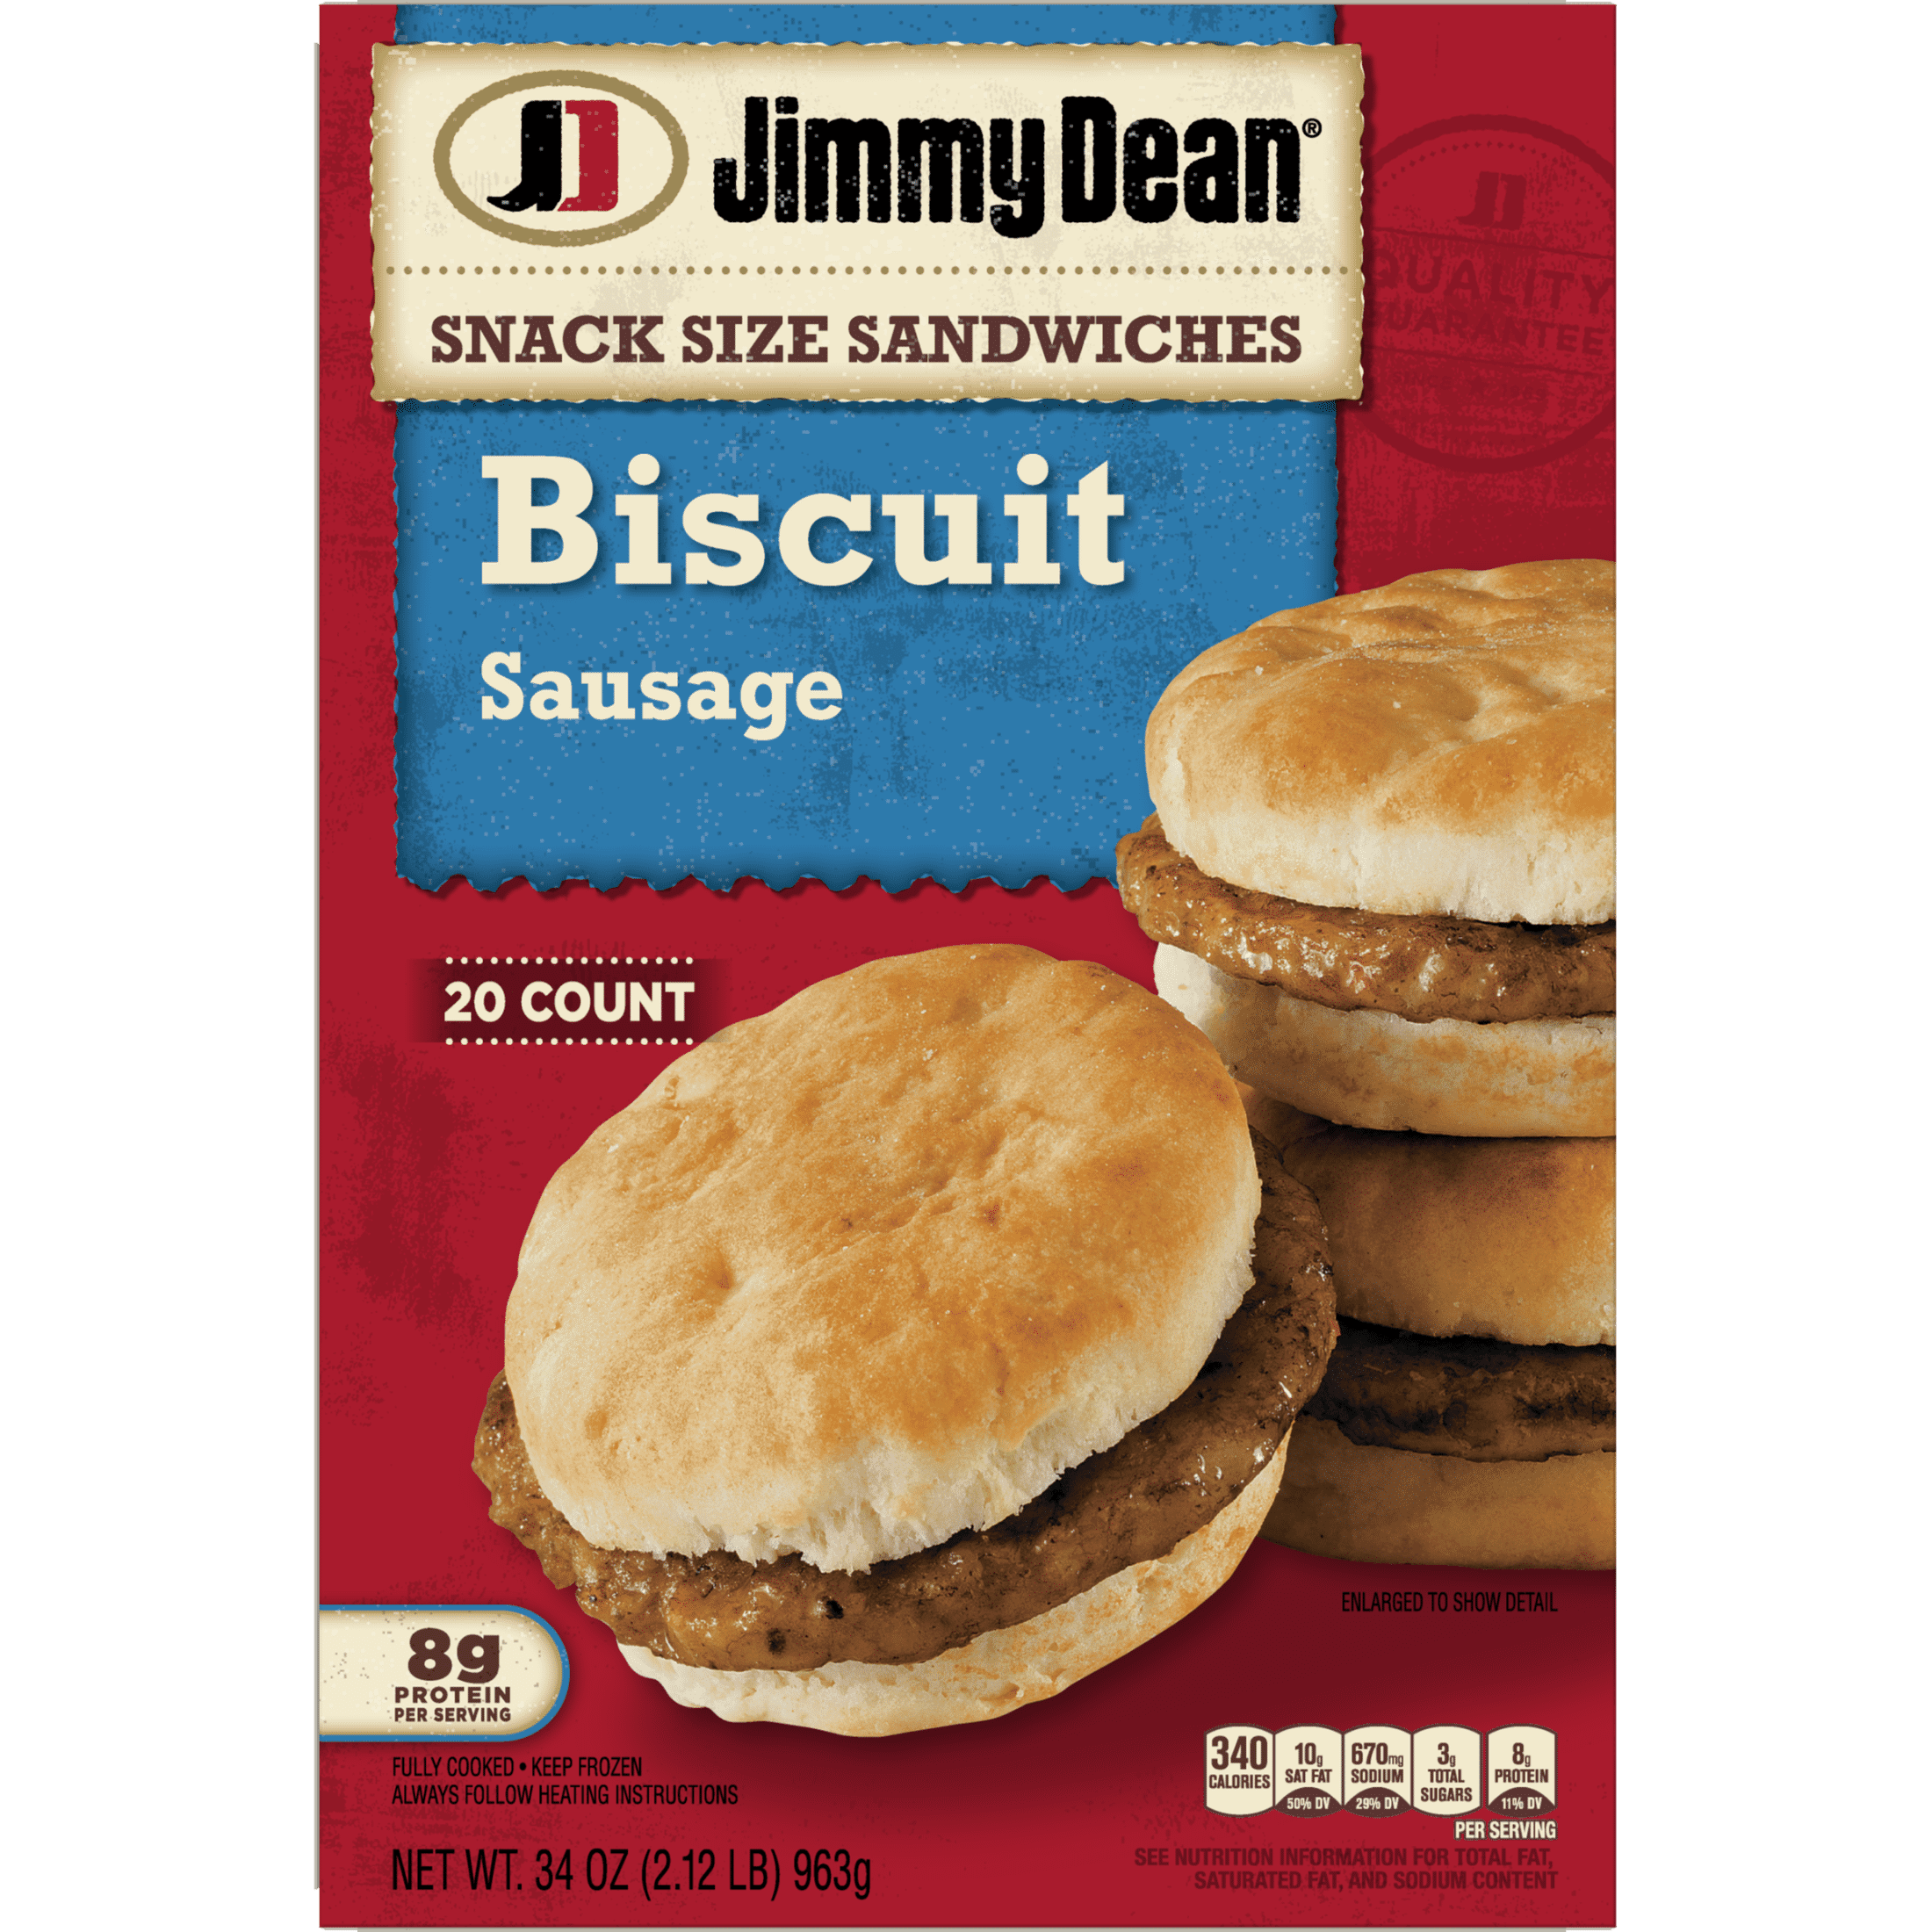 How to cook jimmy dean breakfast sandwiches in conventional oven Jimmy Dean Snack Size Sausage Biscuit Sandwiches 20 Count Frozen Walmart Com Walmart Com